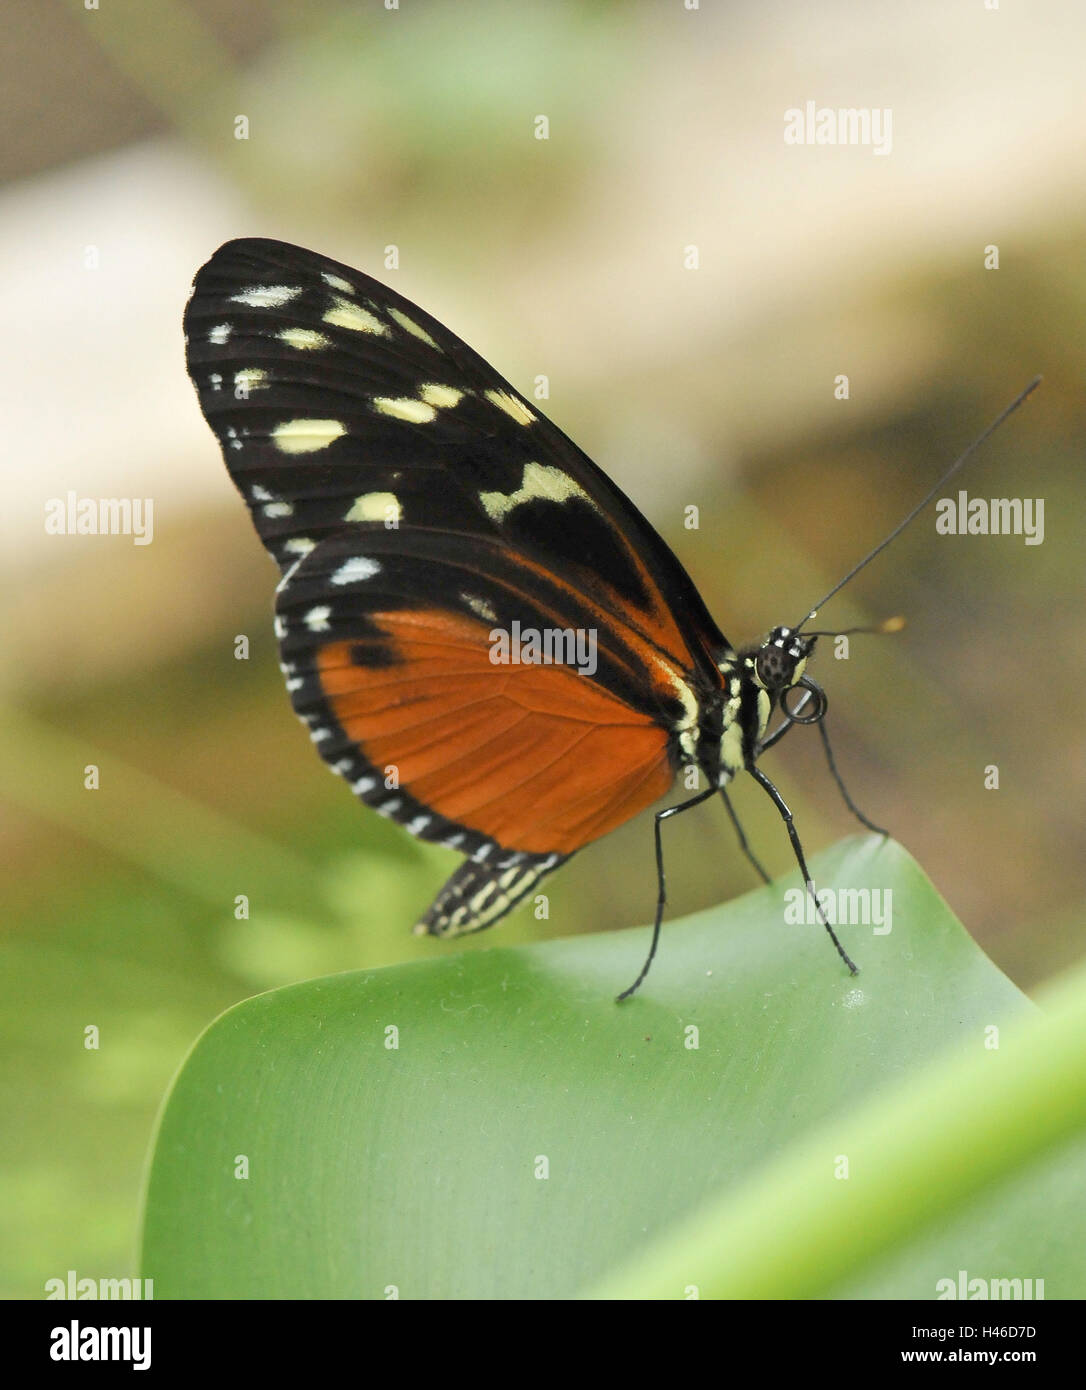 Tiger-passion butterfly, side view Stock Photo - Alamy